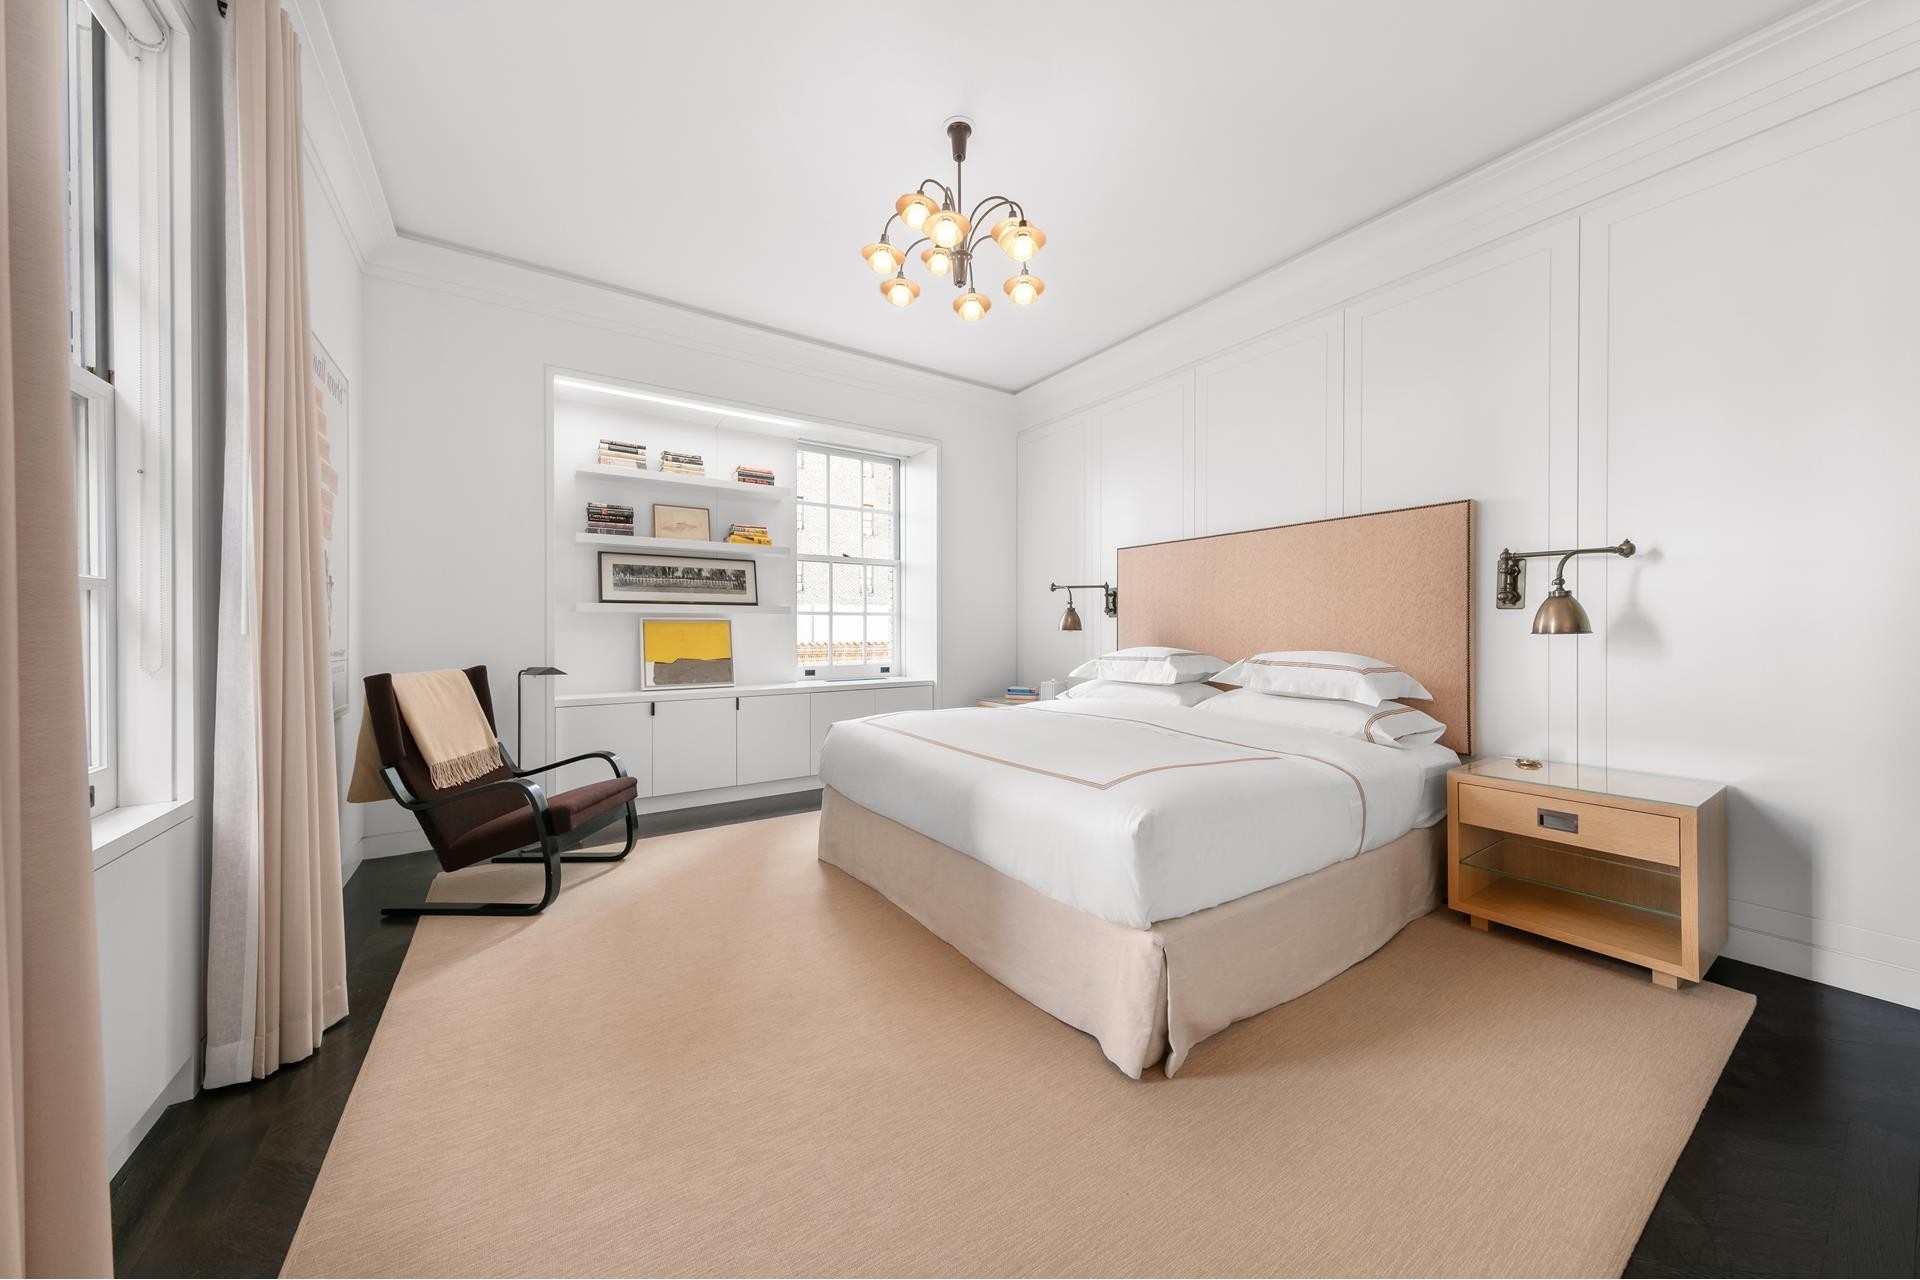 10. Co-op Properties for Sale at Harperley Hall, 41 CENTRAL PARK W, 8C Lincoln Square, New York, NY 10023